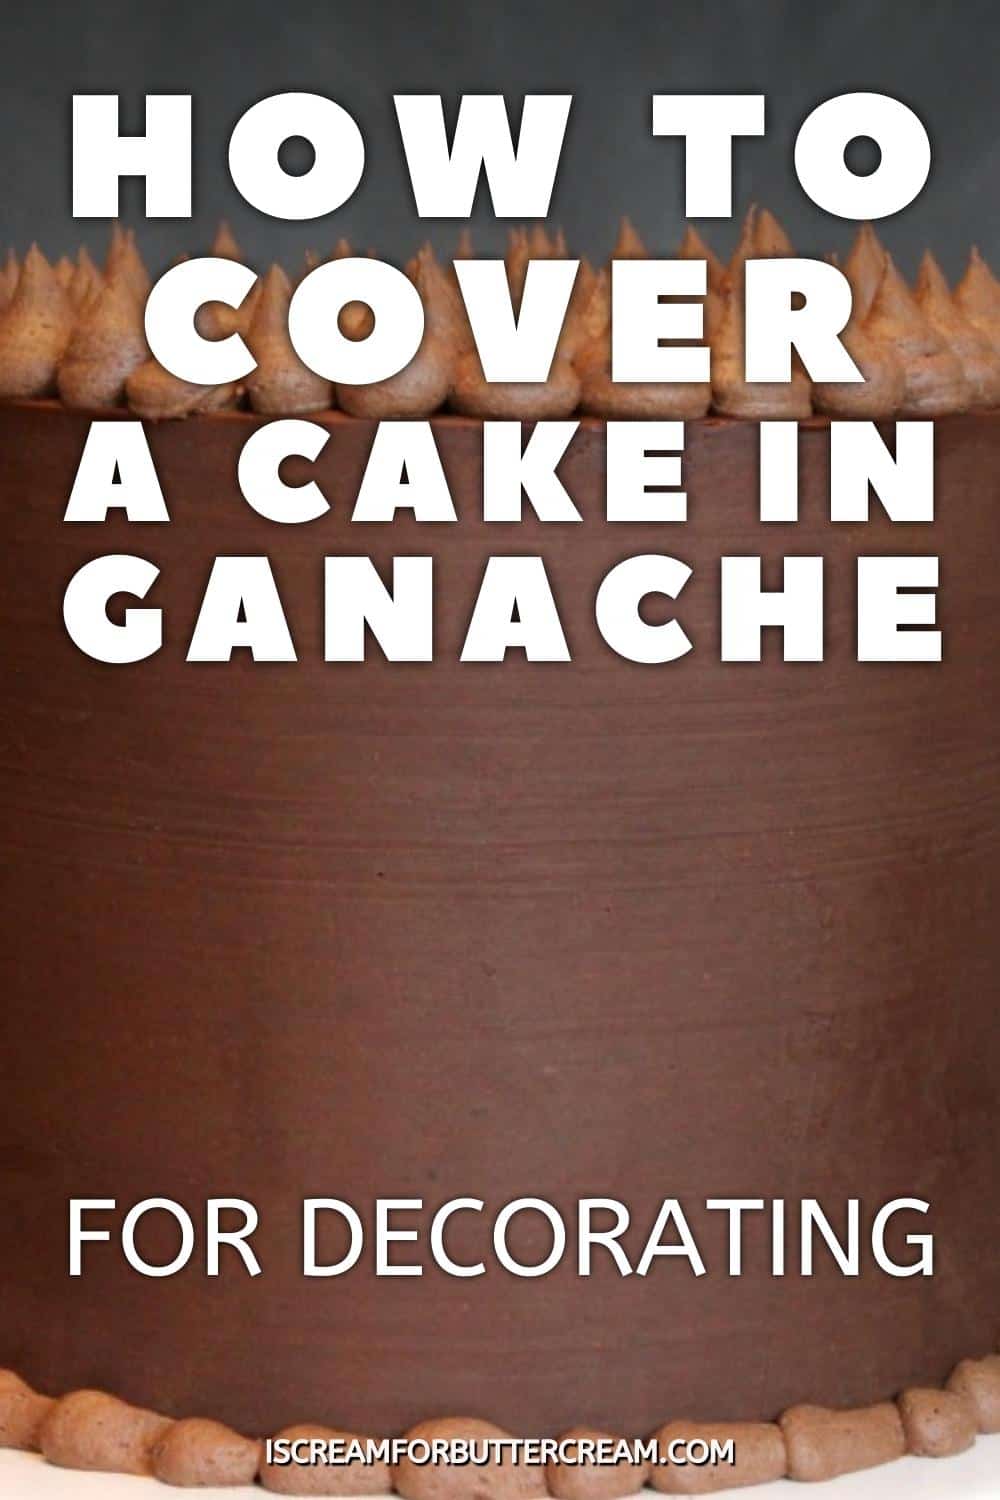 Image of cake with chocolate ganache and text overlay.